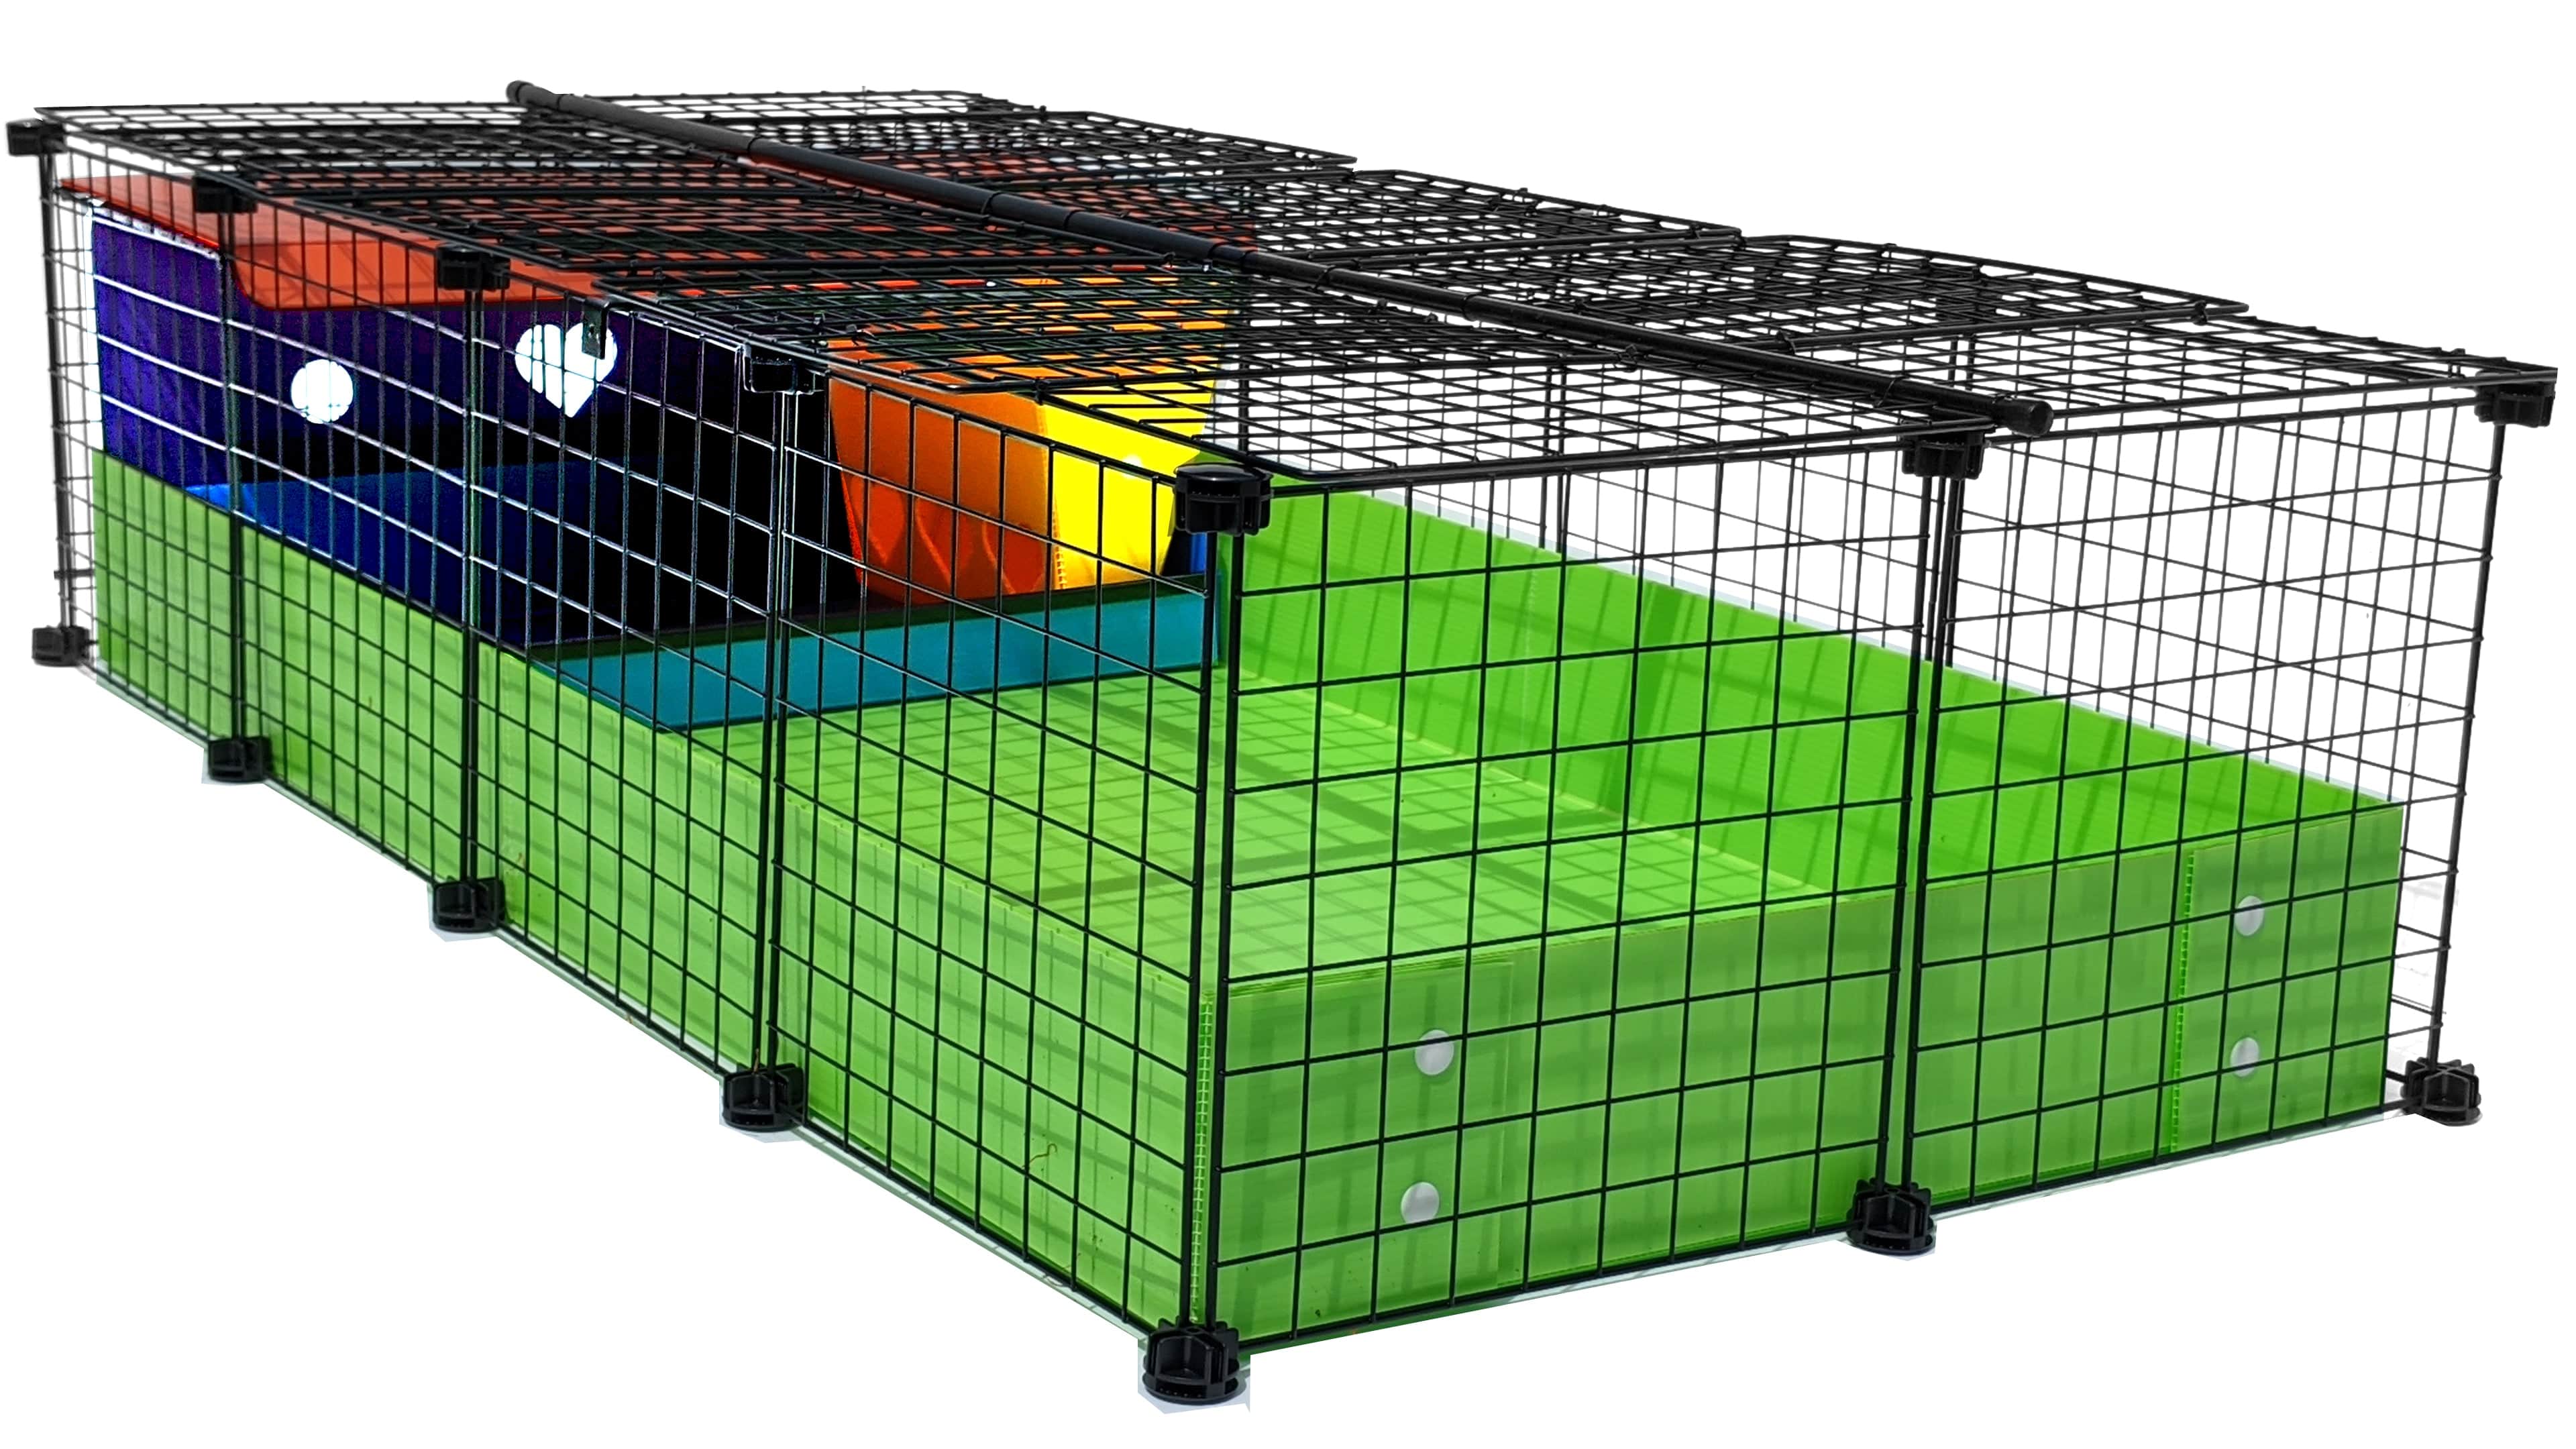 Covered starter kit with a lime C&C guinea pig cage and colorful kitchen suite